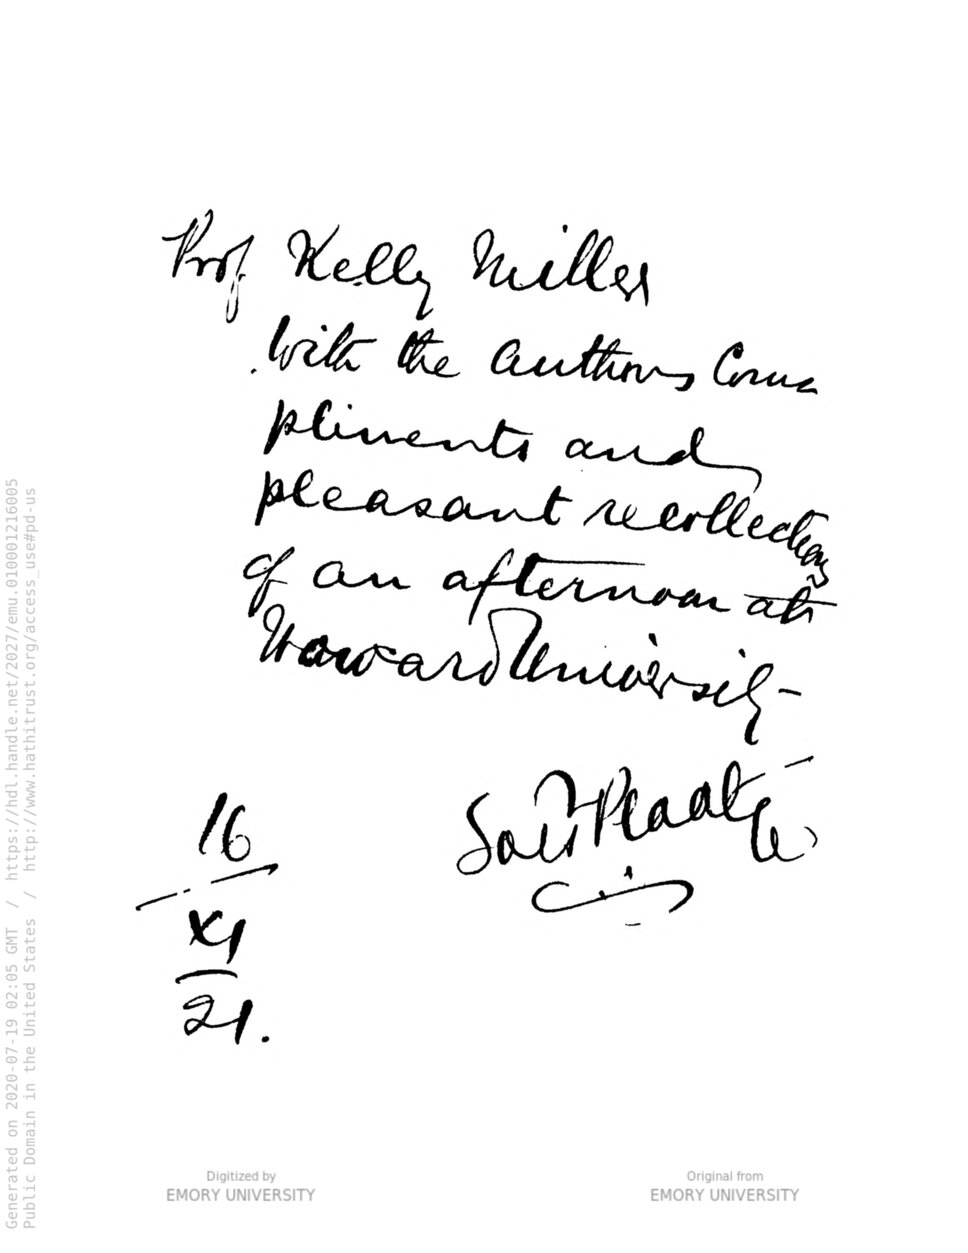 Page inscribed by Solomon T. Plaatje to Professor Kelly Miller, dated November 16, 1921.